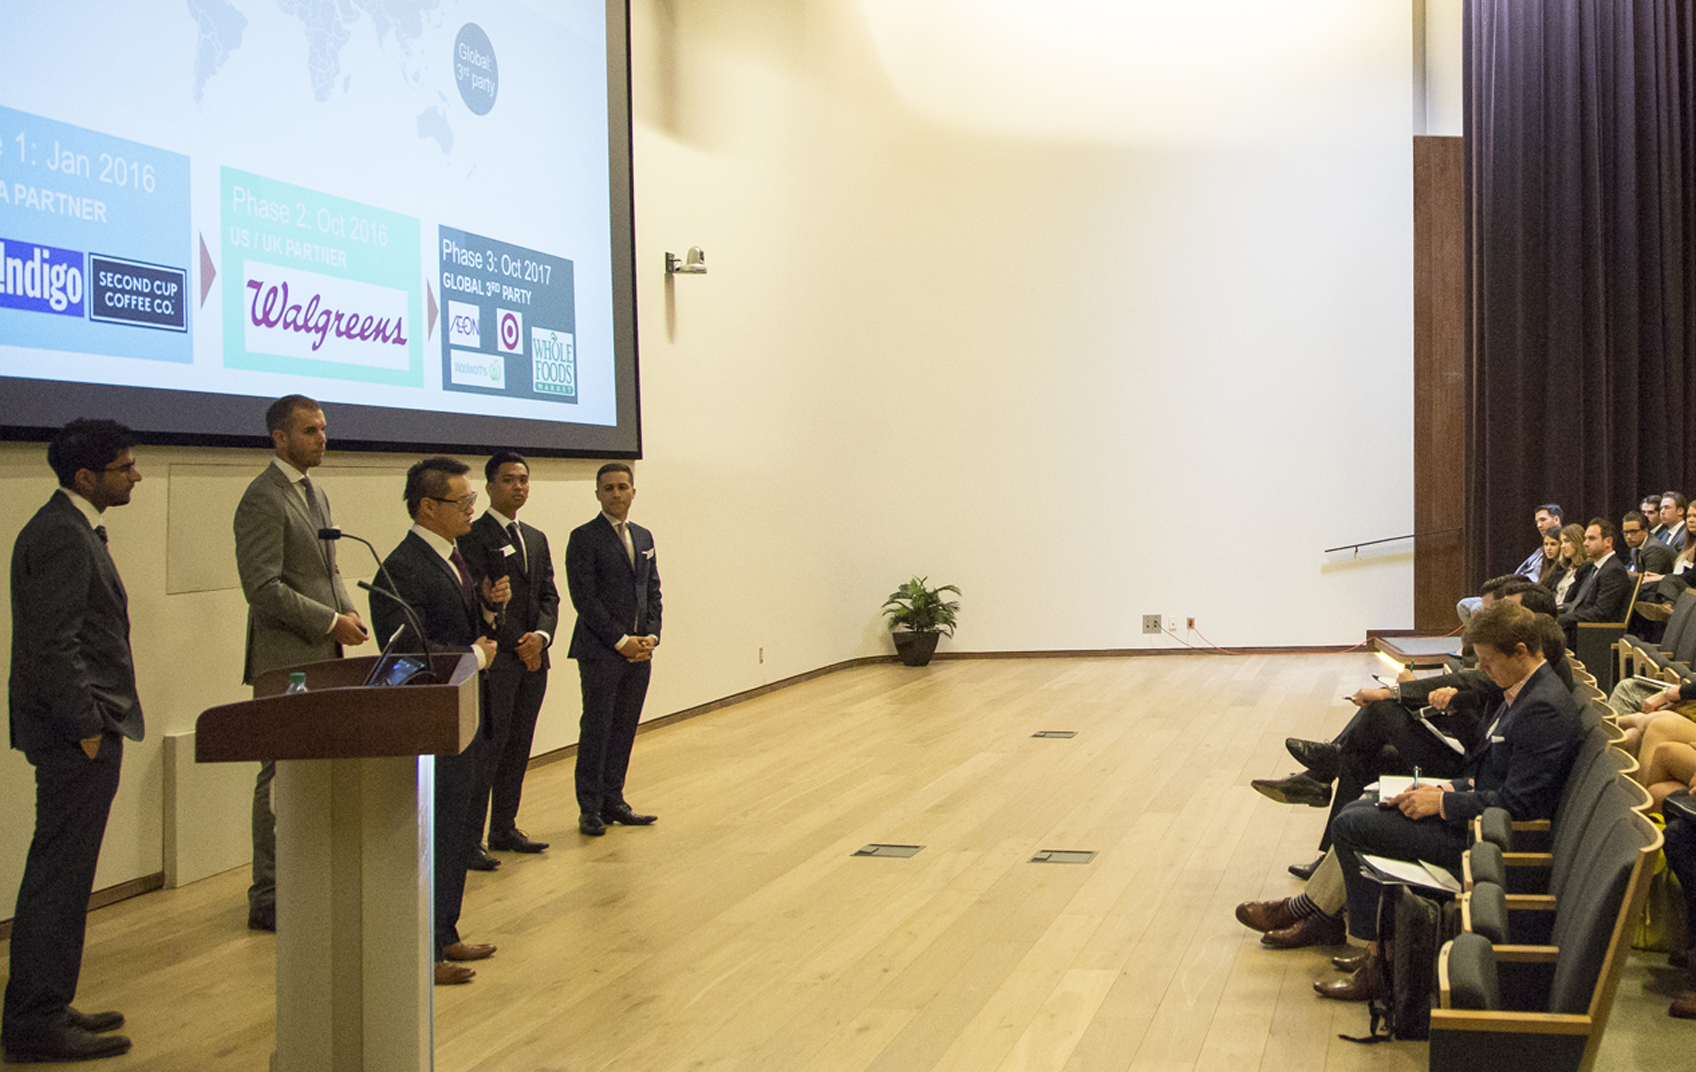 Accenture MBA case competition presentations